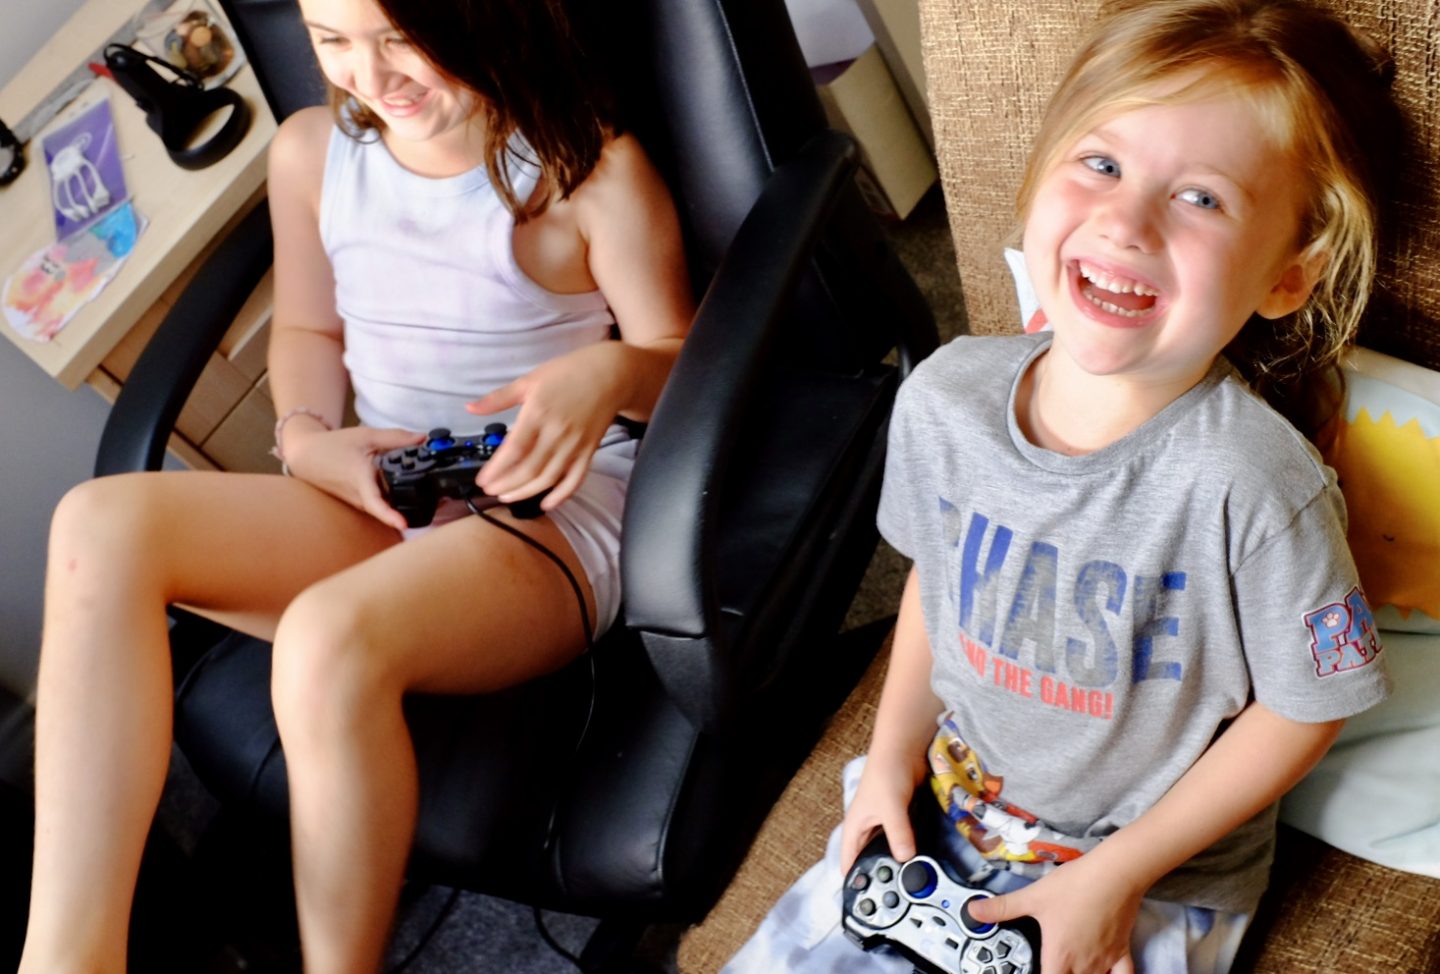 kids laughing playing a video game